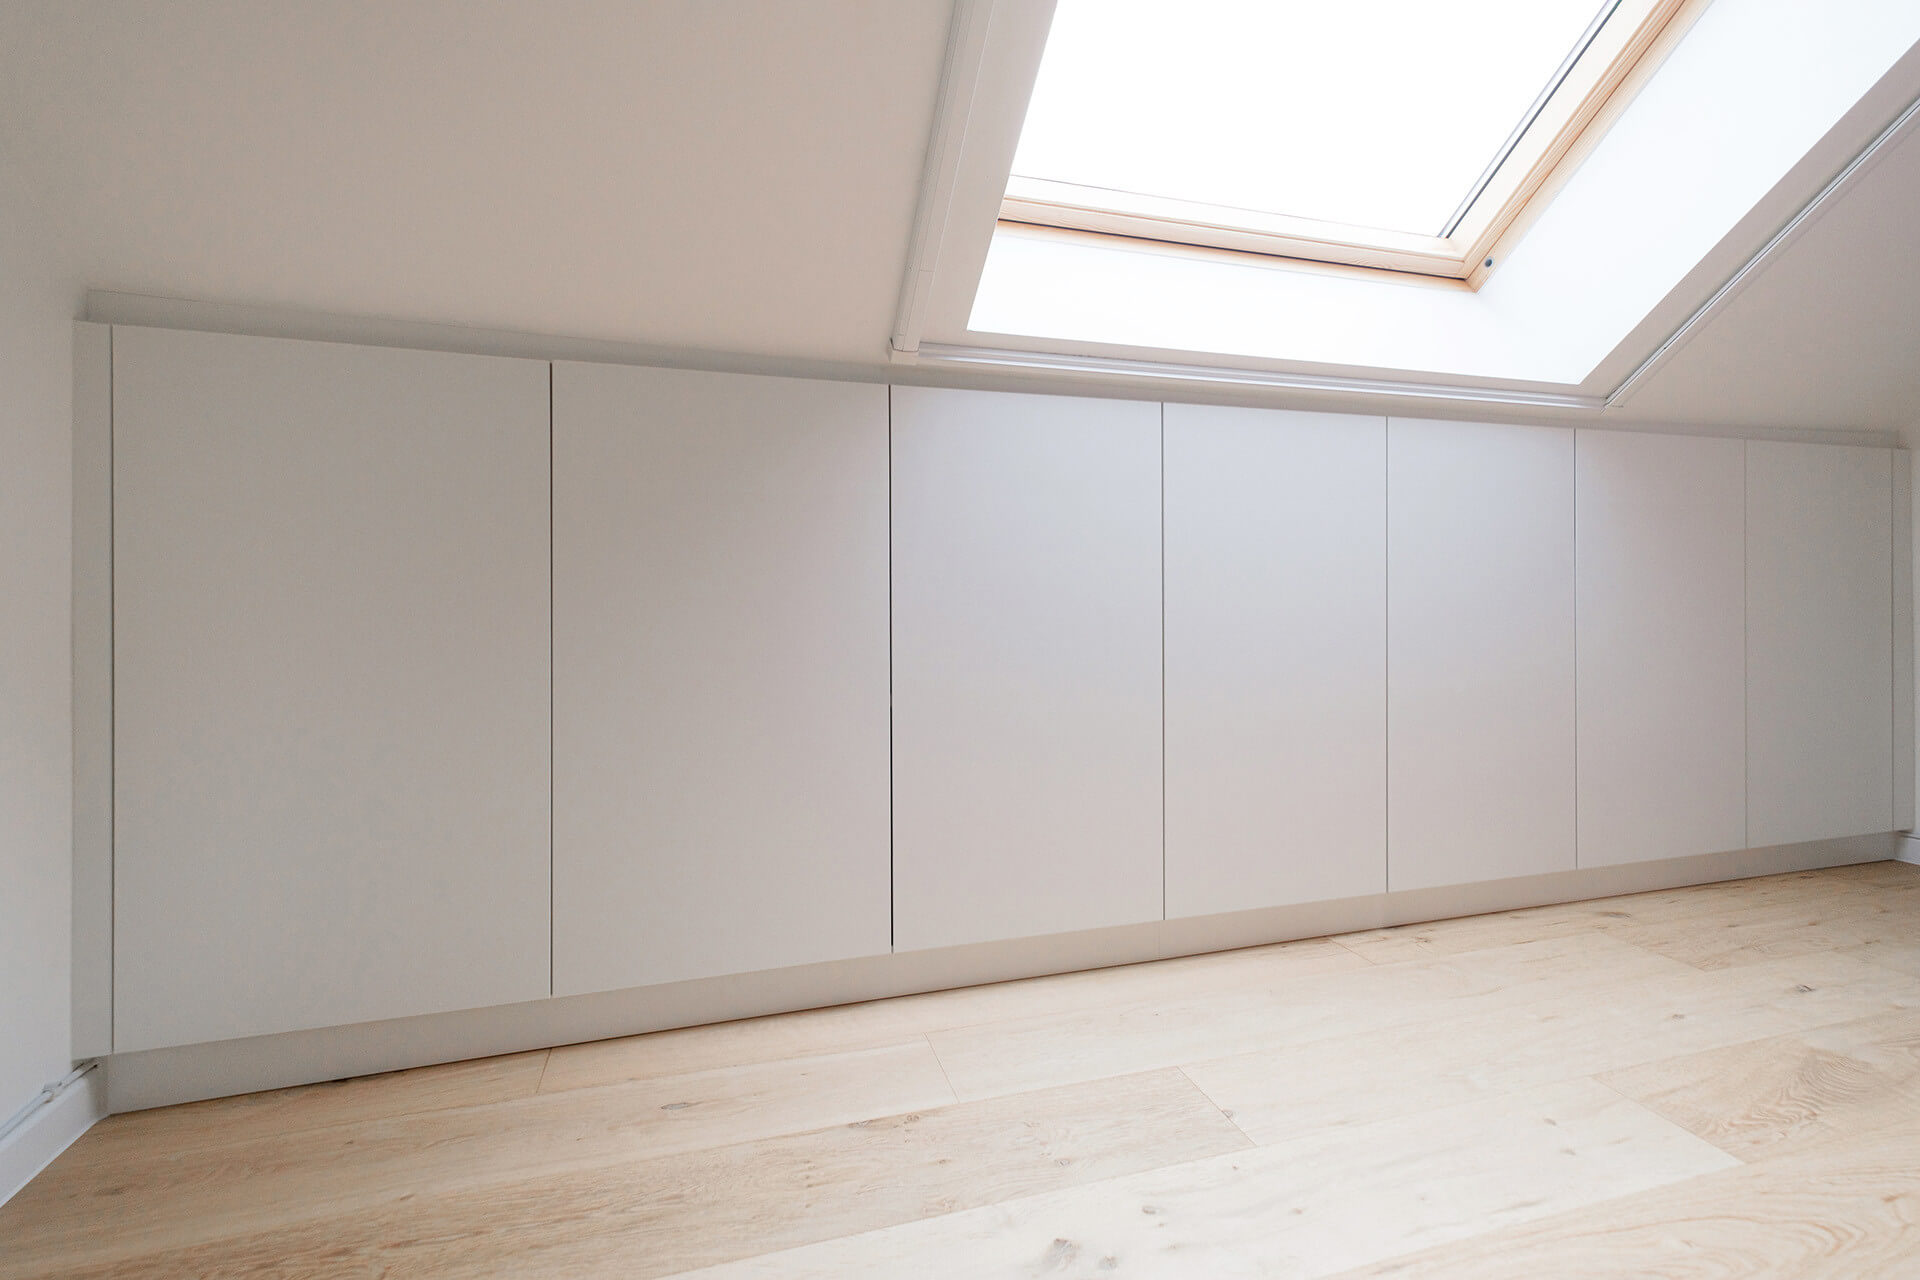 Custom storage cabinets under a sloping roof.